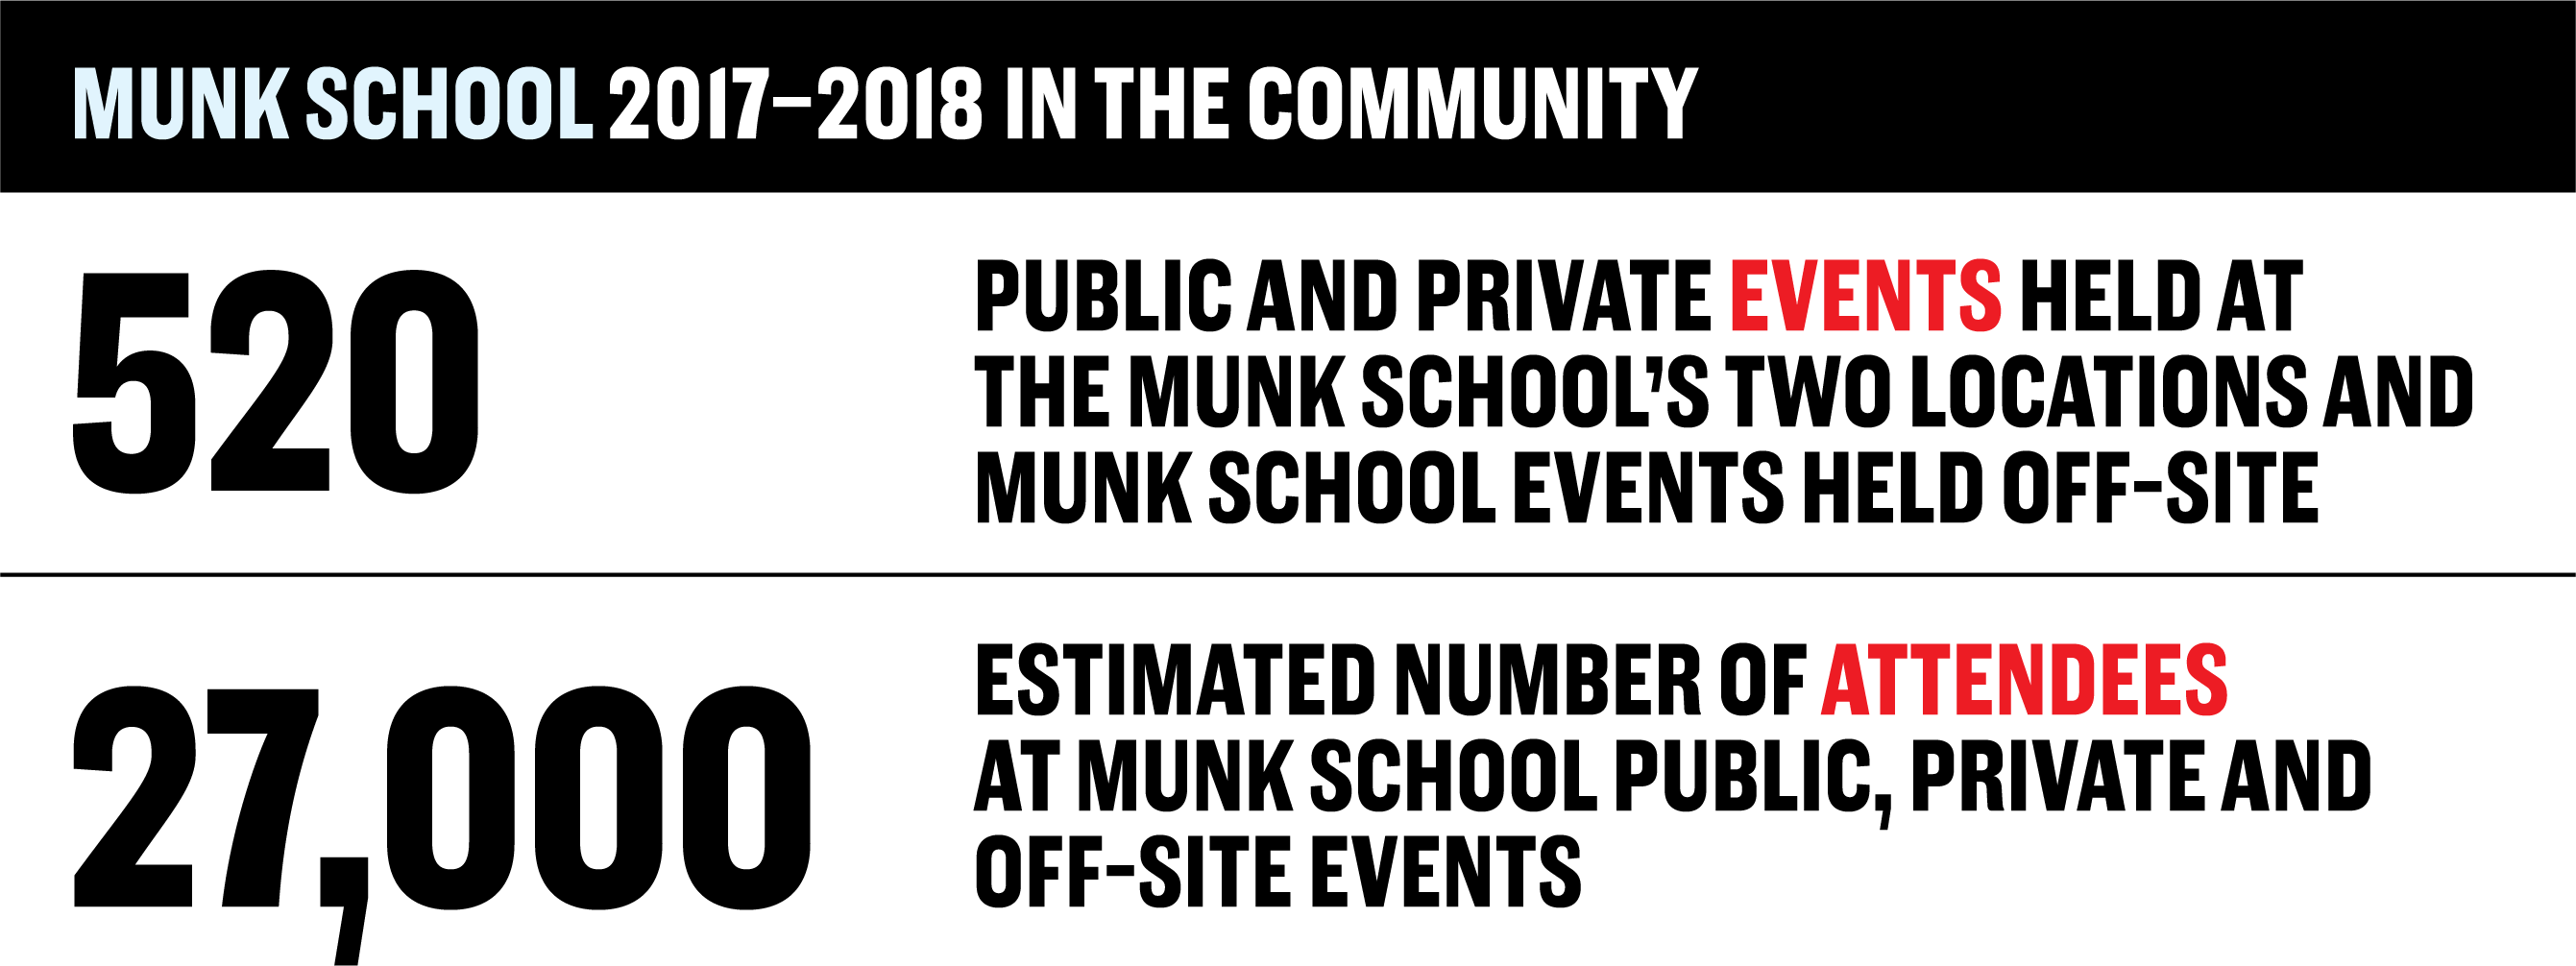 Munk School 2017–2018 in the Community 520 Public and private events held at the Munk School’s two locations and Munk School events held off-site; 27,000 Estimated number of attendees at Munk School public, private and off-site events.